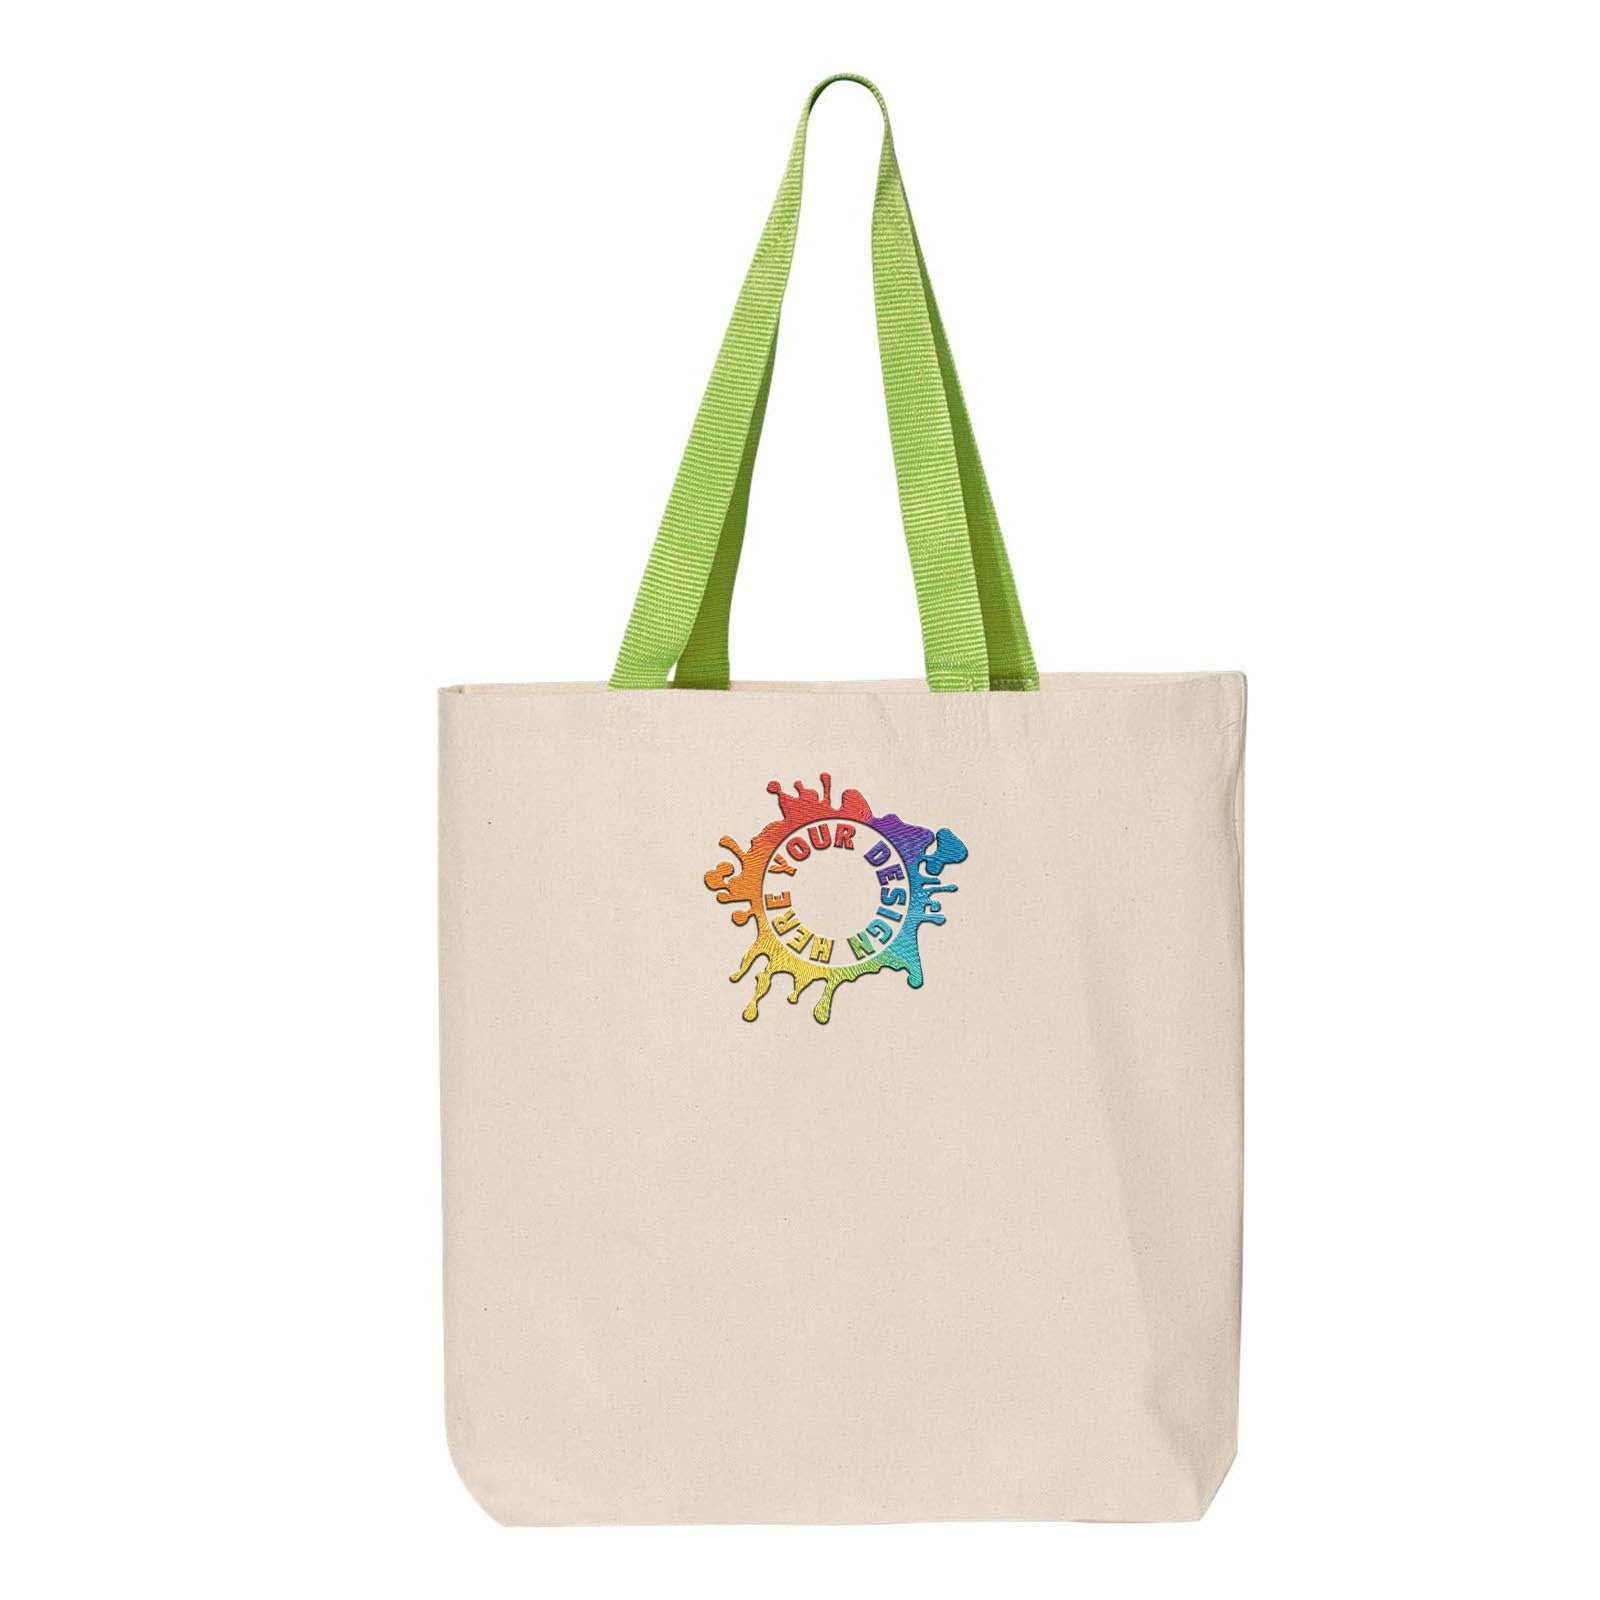 Q-Tees 11L Canvas Tote with Contrast-Color Handles Embroidery - Mato & Hash